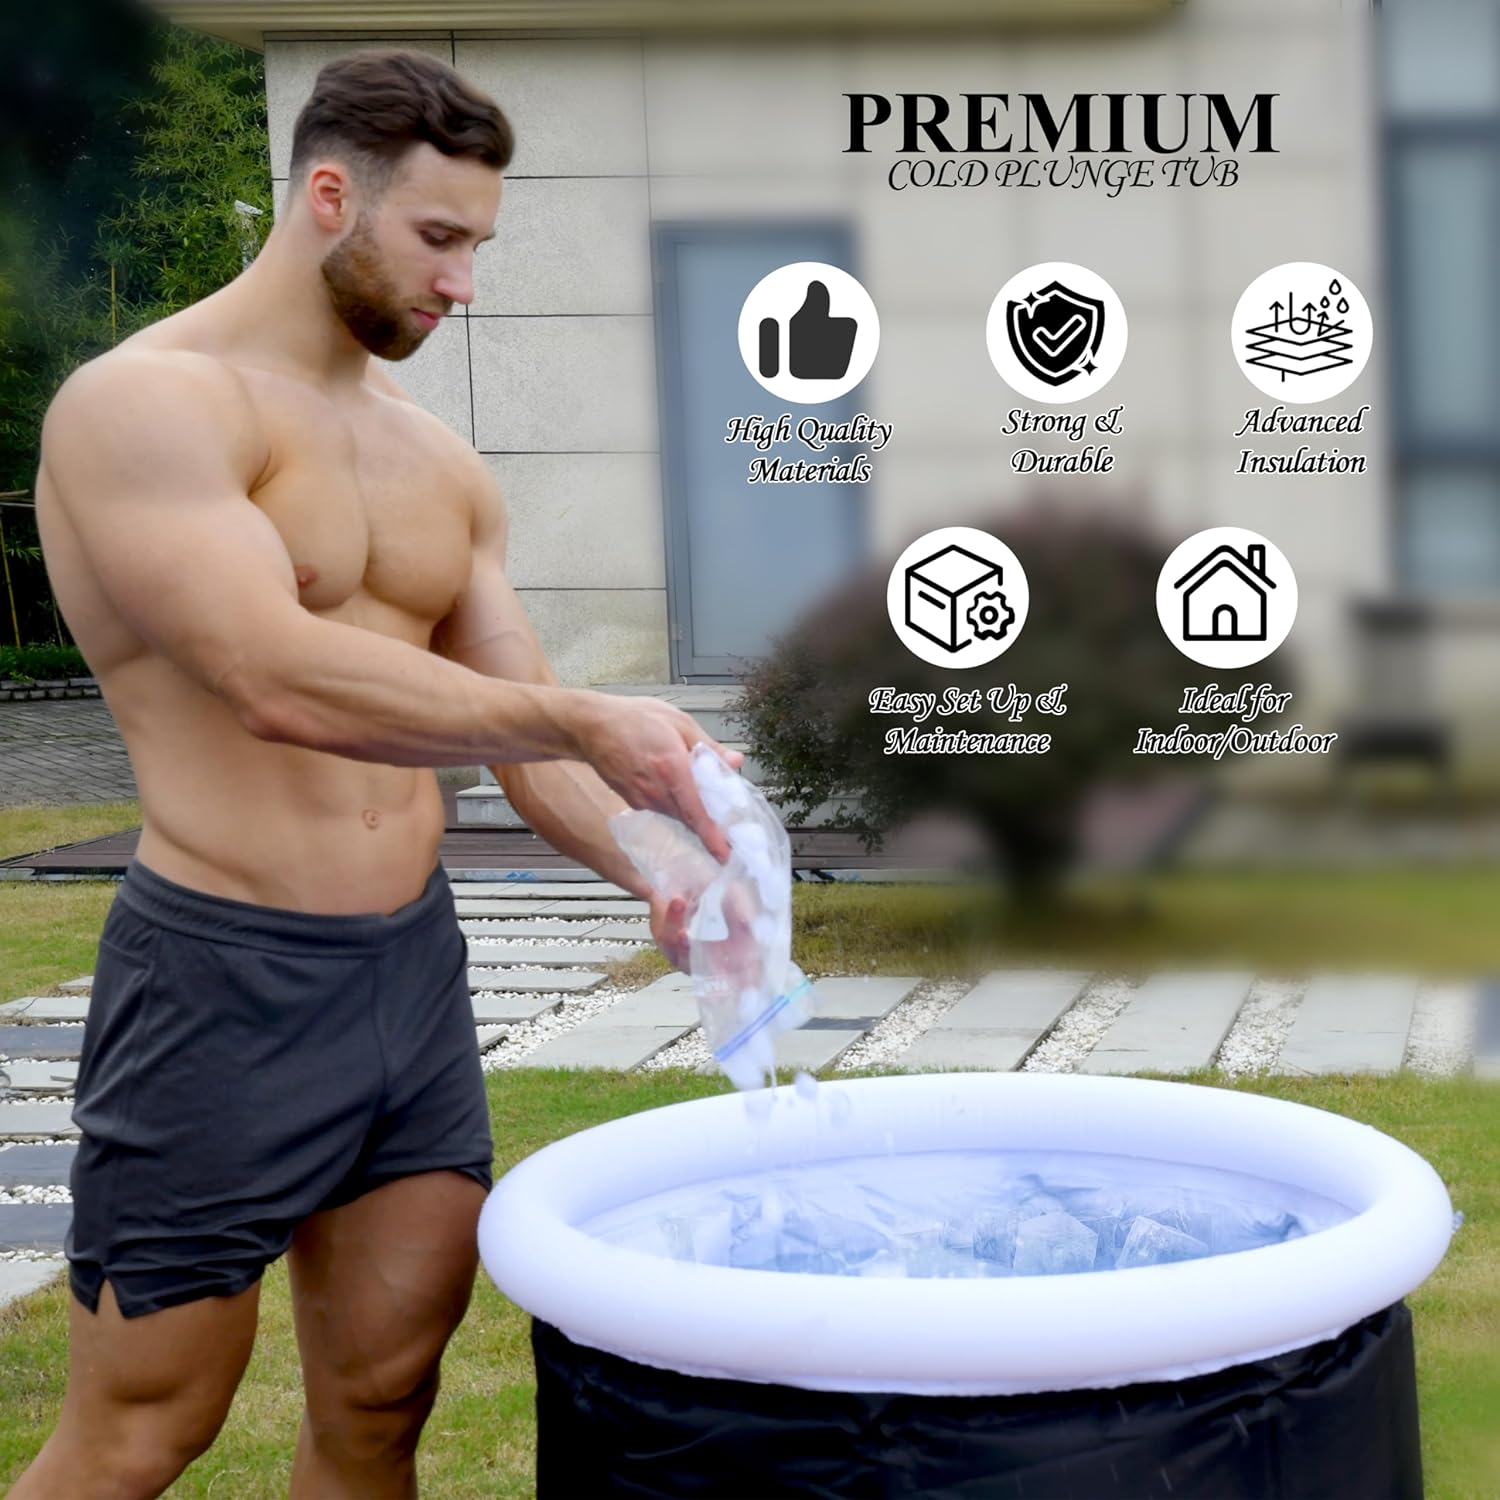 Portable and inflatable ice bath container with carrying case